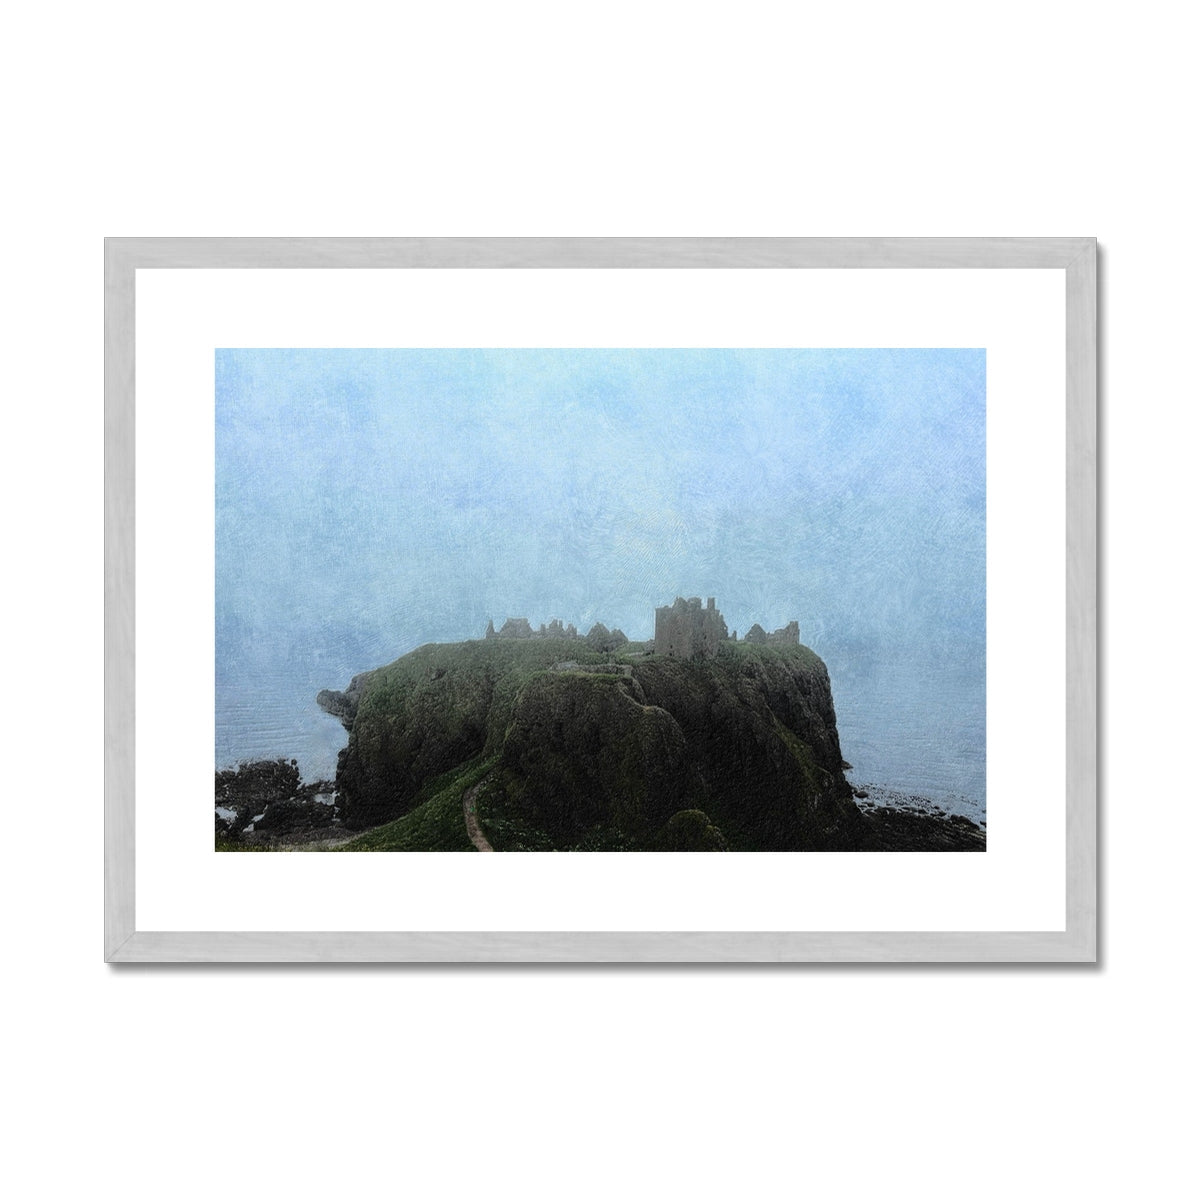 Dunnottar Castle Mist Painting | Antique Framed & Mounted Prints From Scotland-Antique Framed & Mounted Prints-Scottish Castles Art Gallery-A2 Landscape-Silver Frame-Paintings, Prints, Homeware, Art Gifts From Scotland By Scottish Artist Kevin Hunter